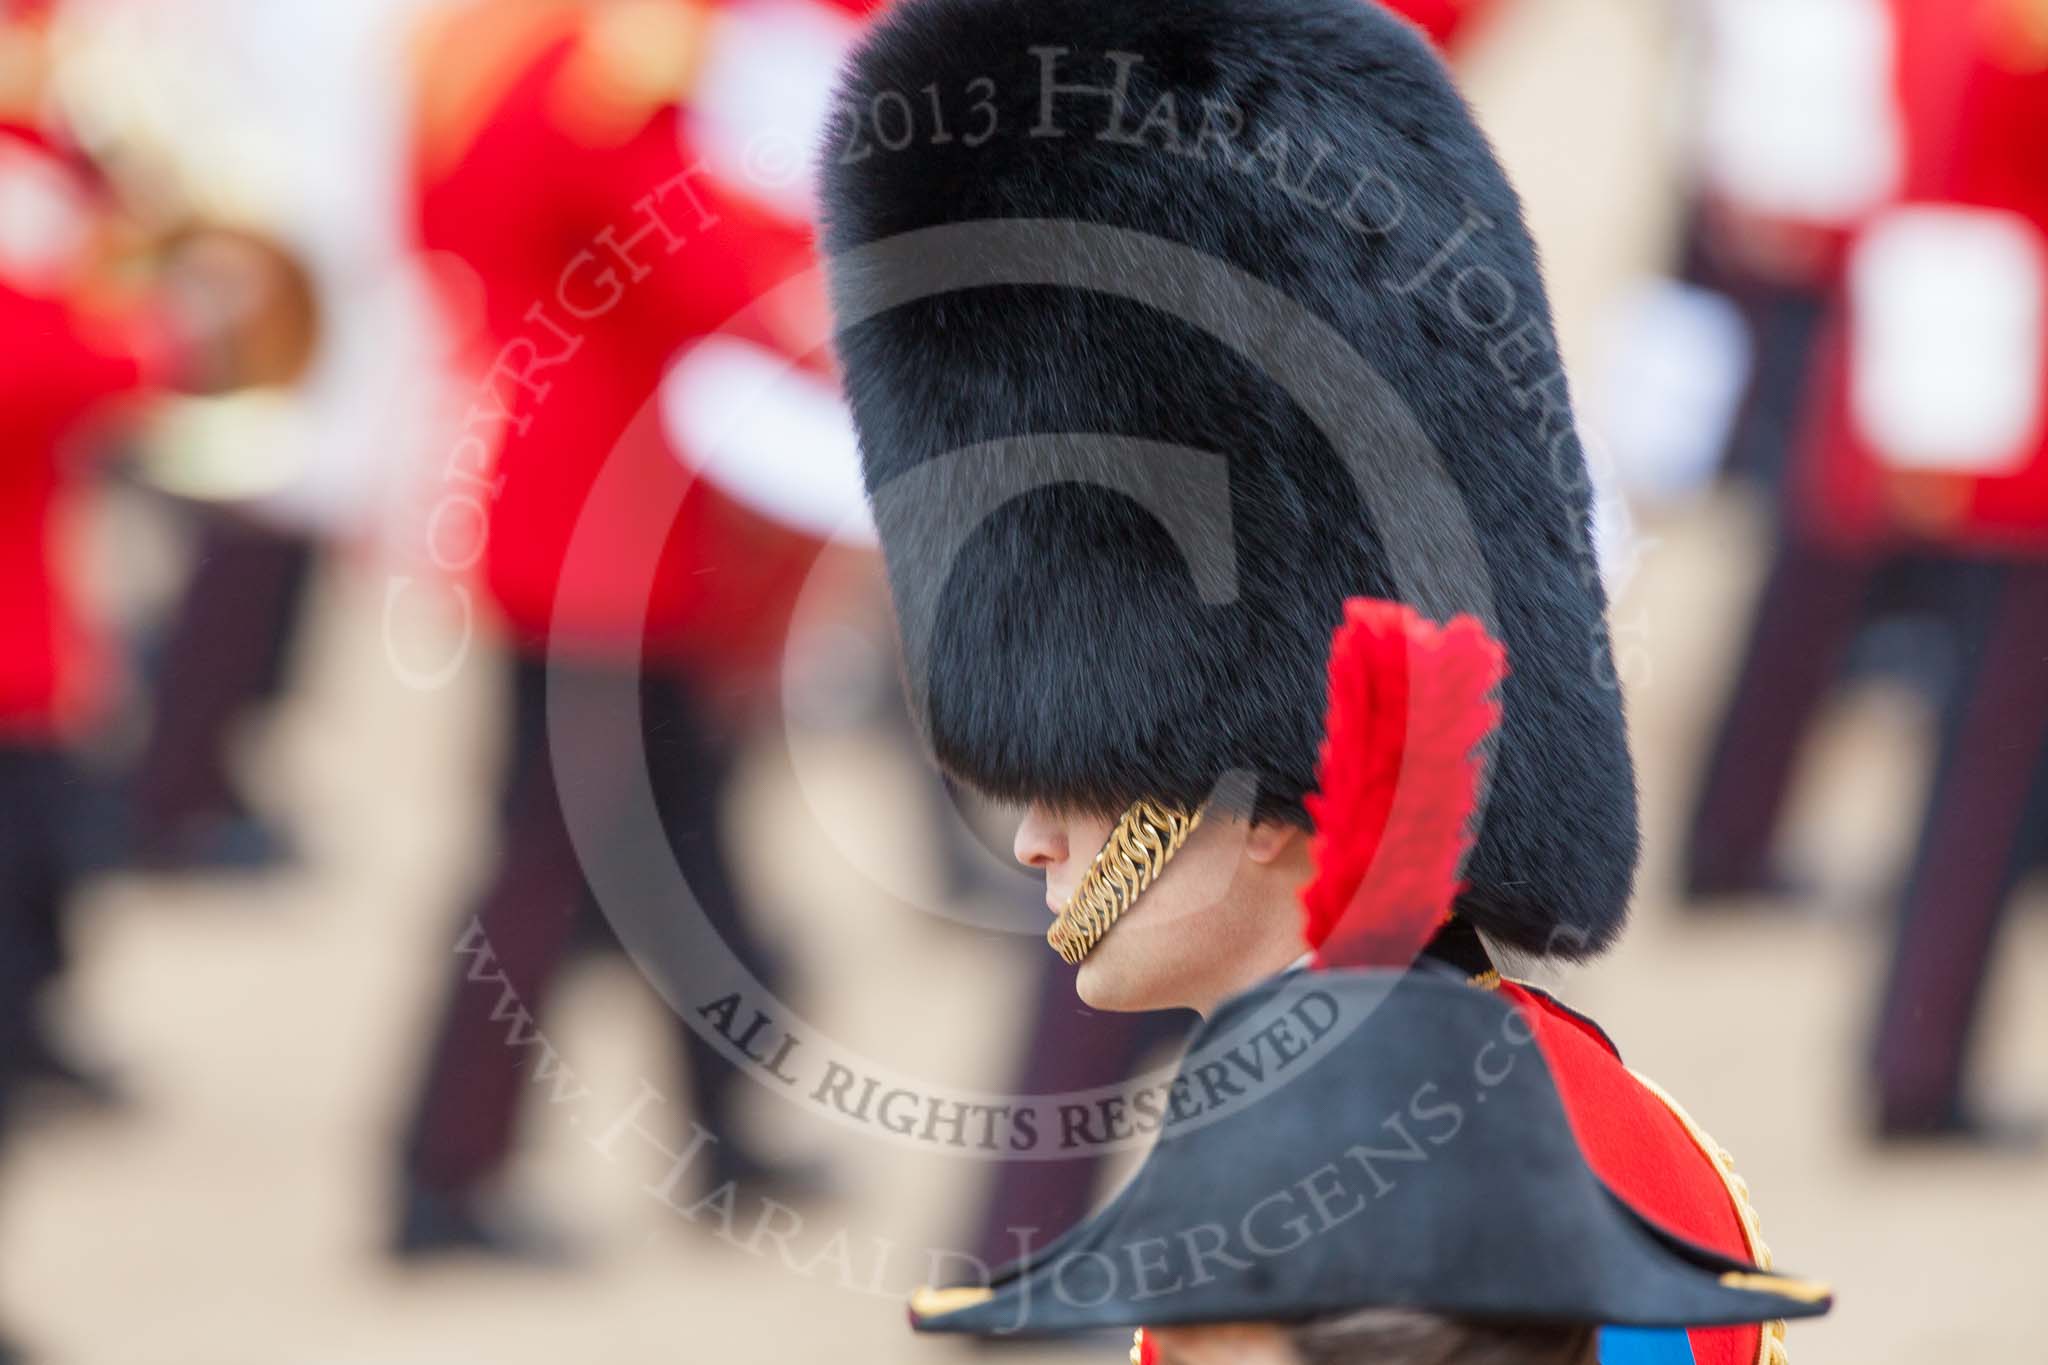 Trooping the Colour 2013: HRH HRH The Duke of Cambridge, Colonel Irish Guards, in a profile view. Image #814, 15 June 2013 12:10 Horse Guards Parade, London, UK